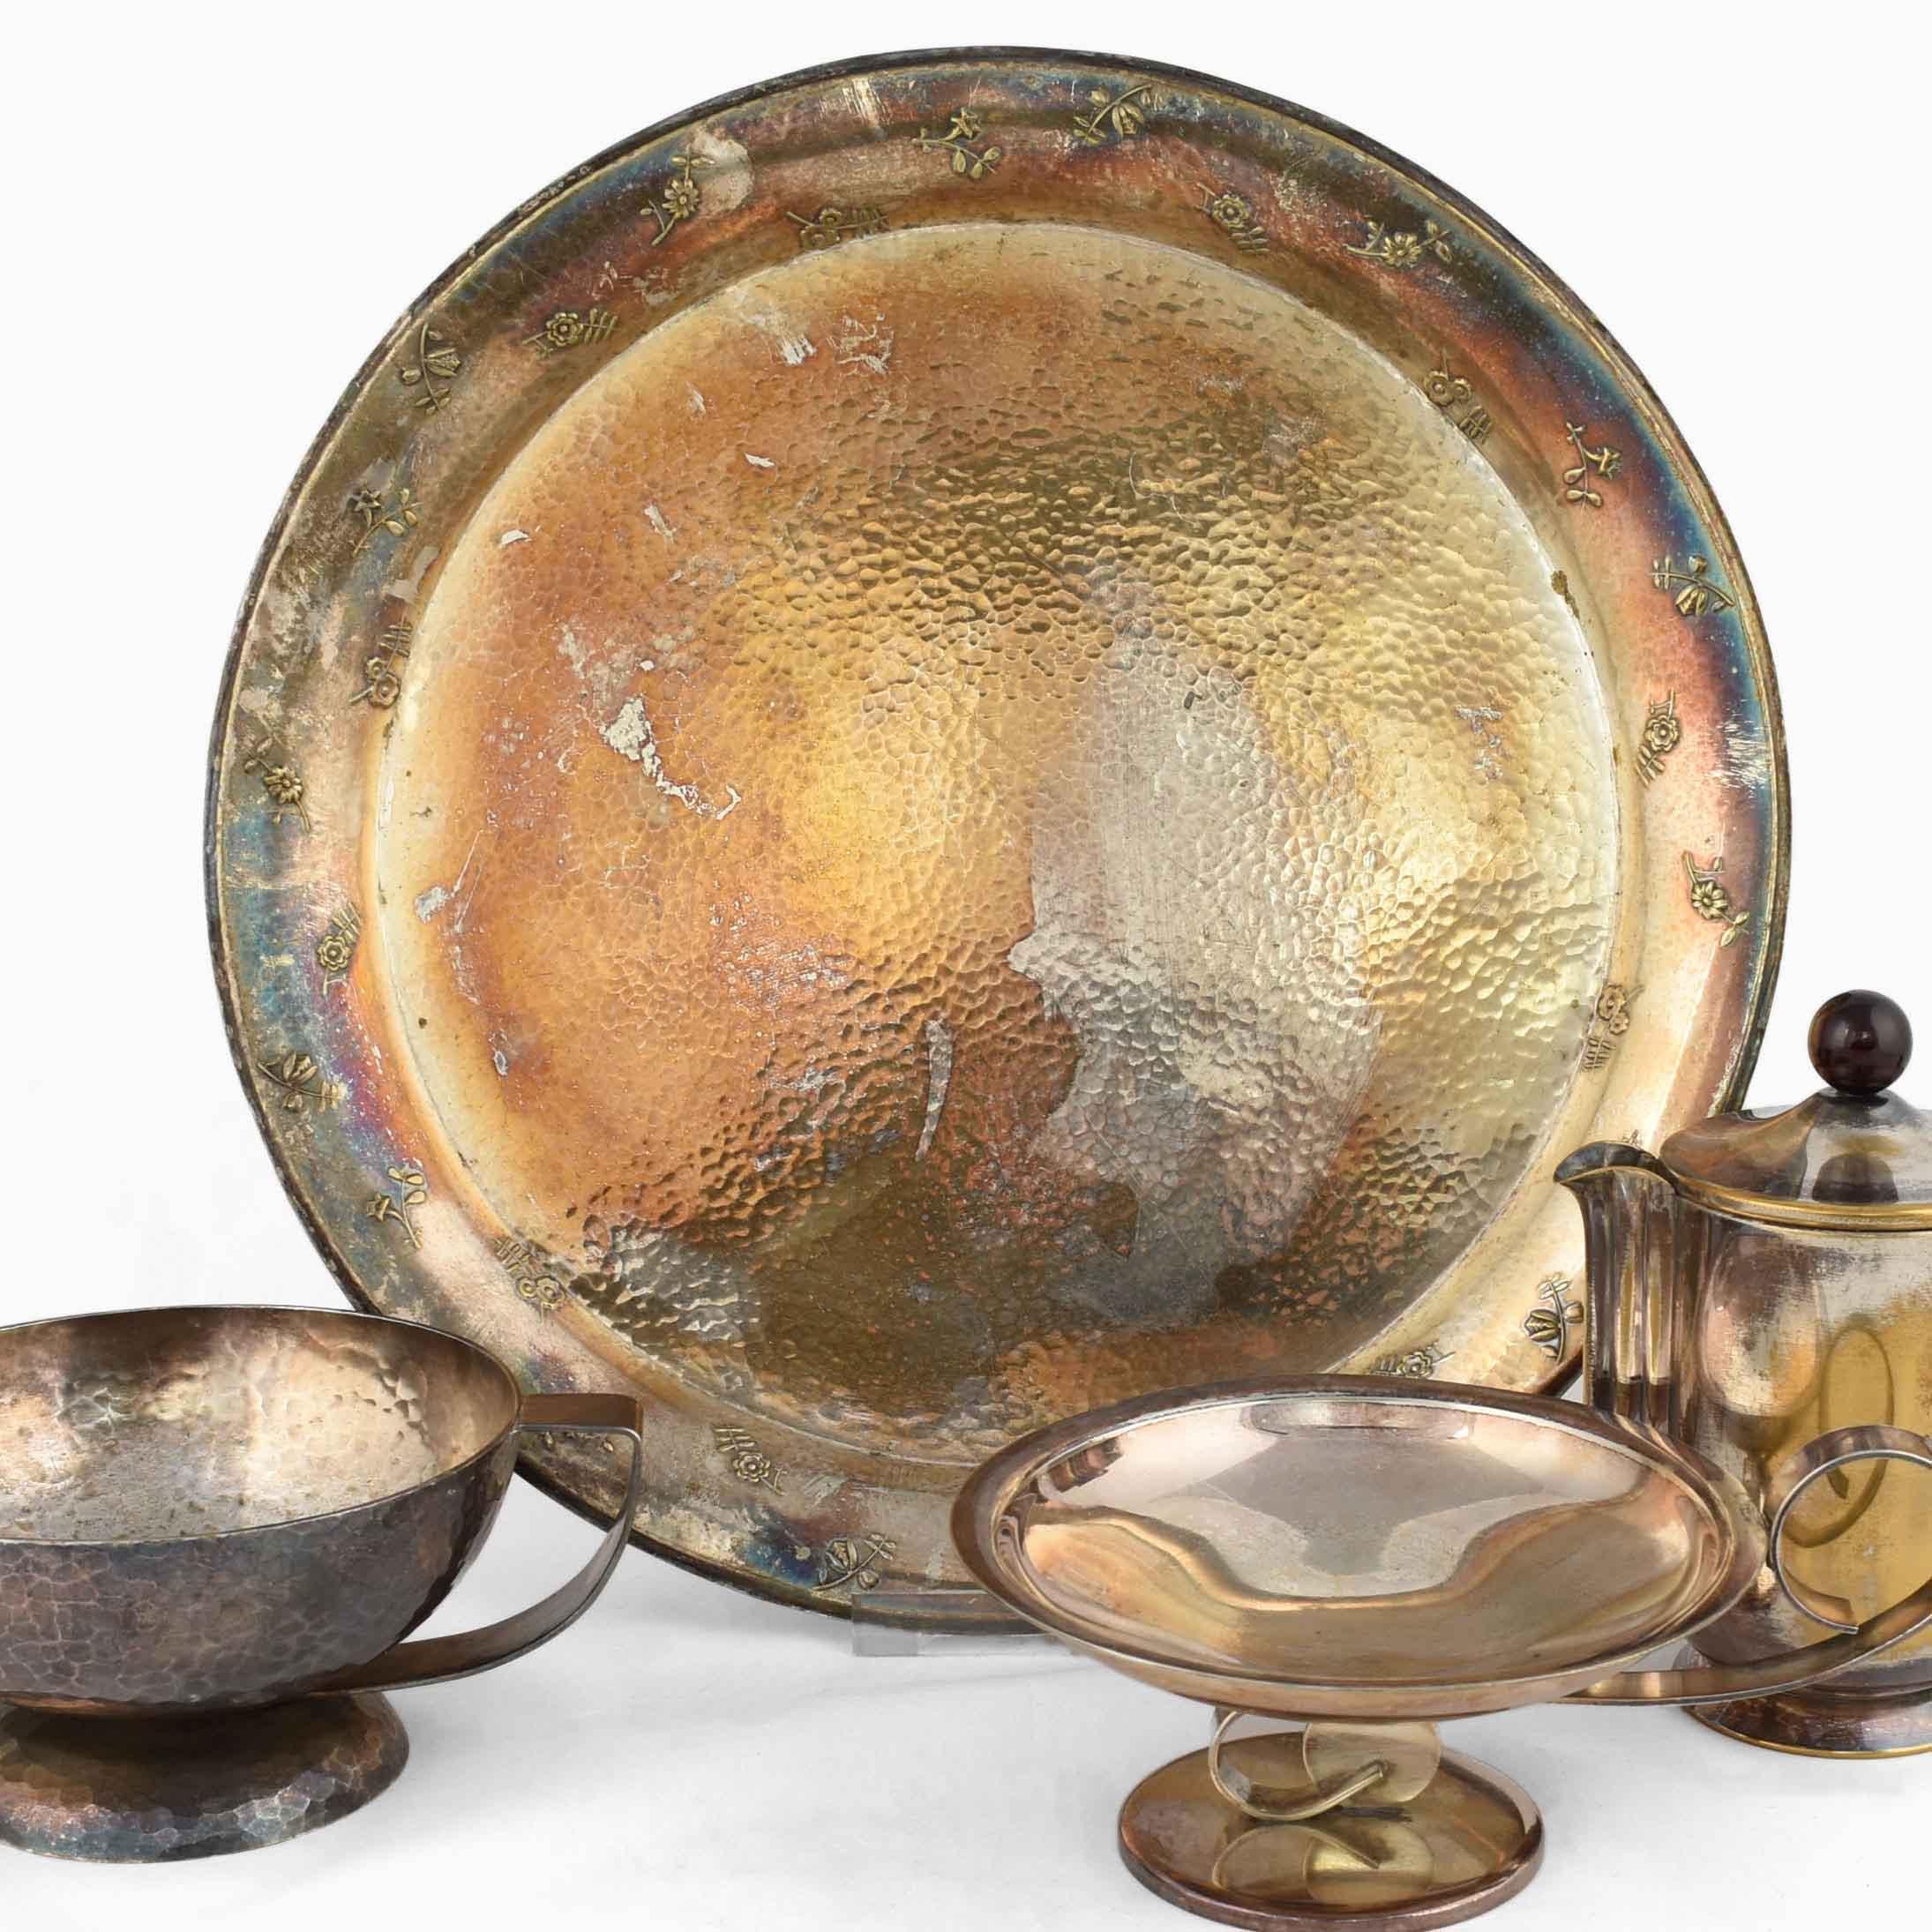 Mixed Silver Lot is an original group of decorative Art Déco objects realized by various artists in the 1920s. 

The group includes four pieces: an handle bowl by Georg Nilsson (H. 7 cm), a smaller bowl (H. 6.5 cm), a circular silver plate (Ø 29.5